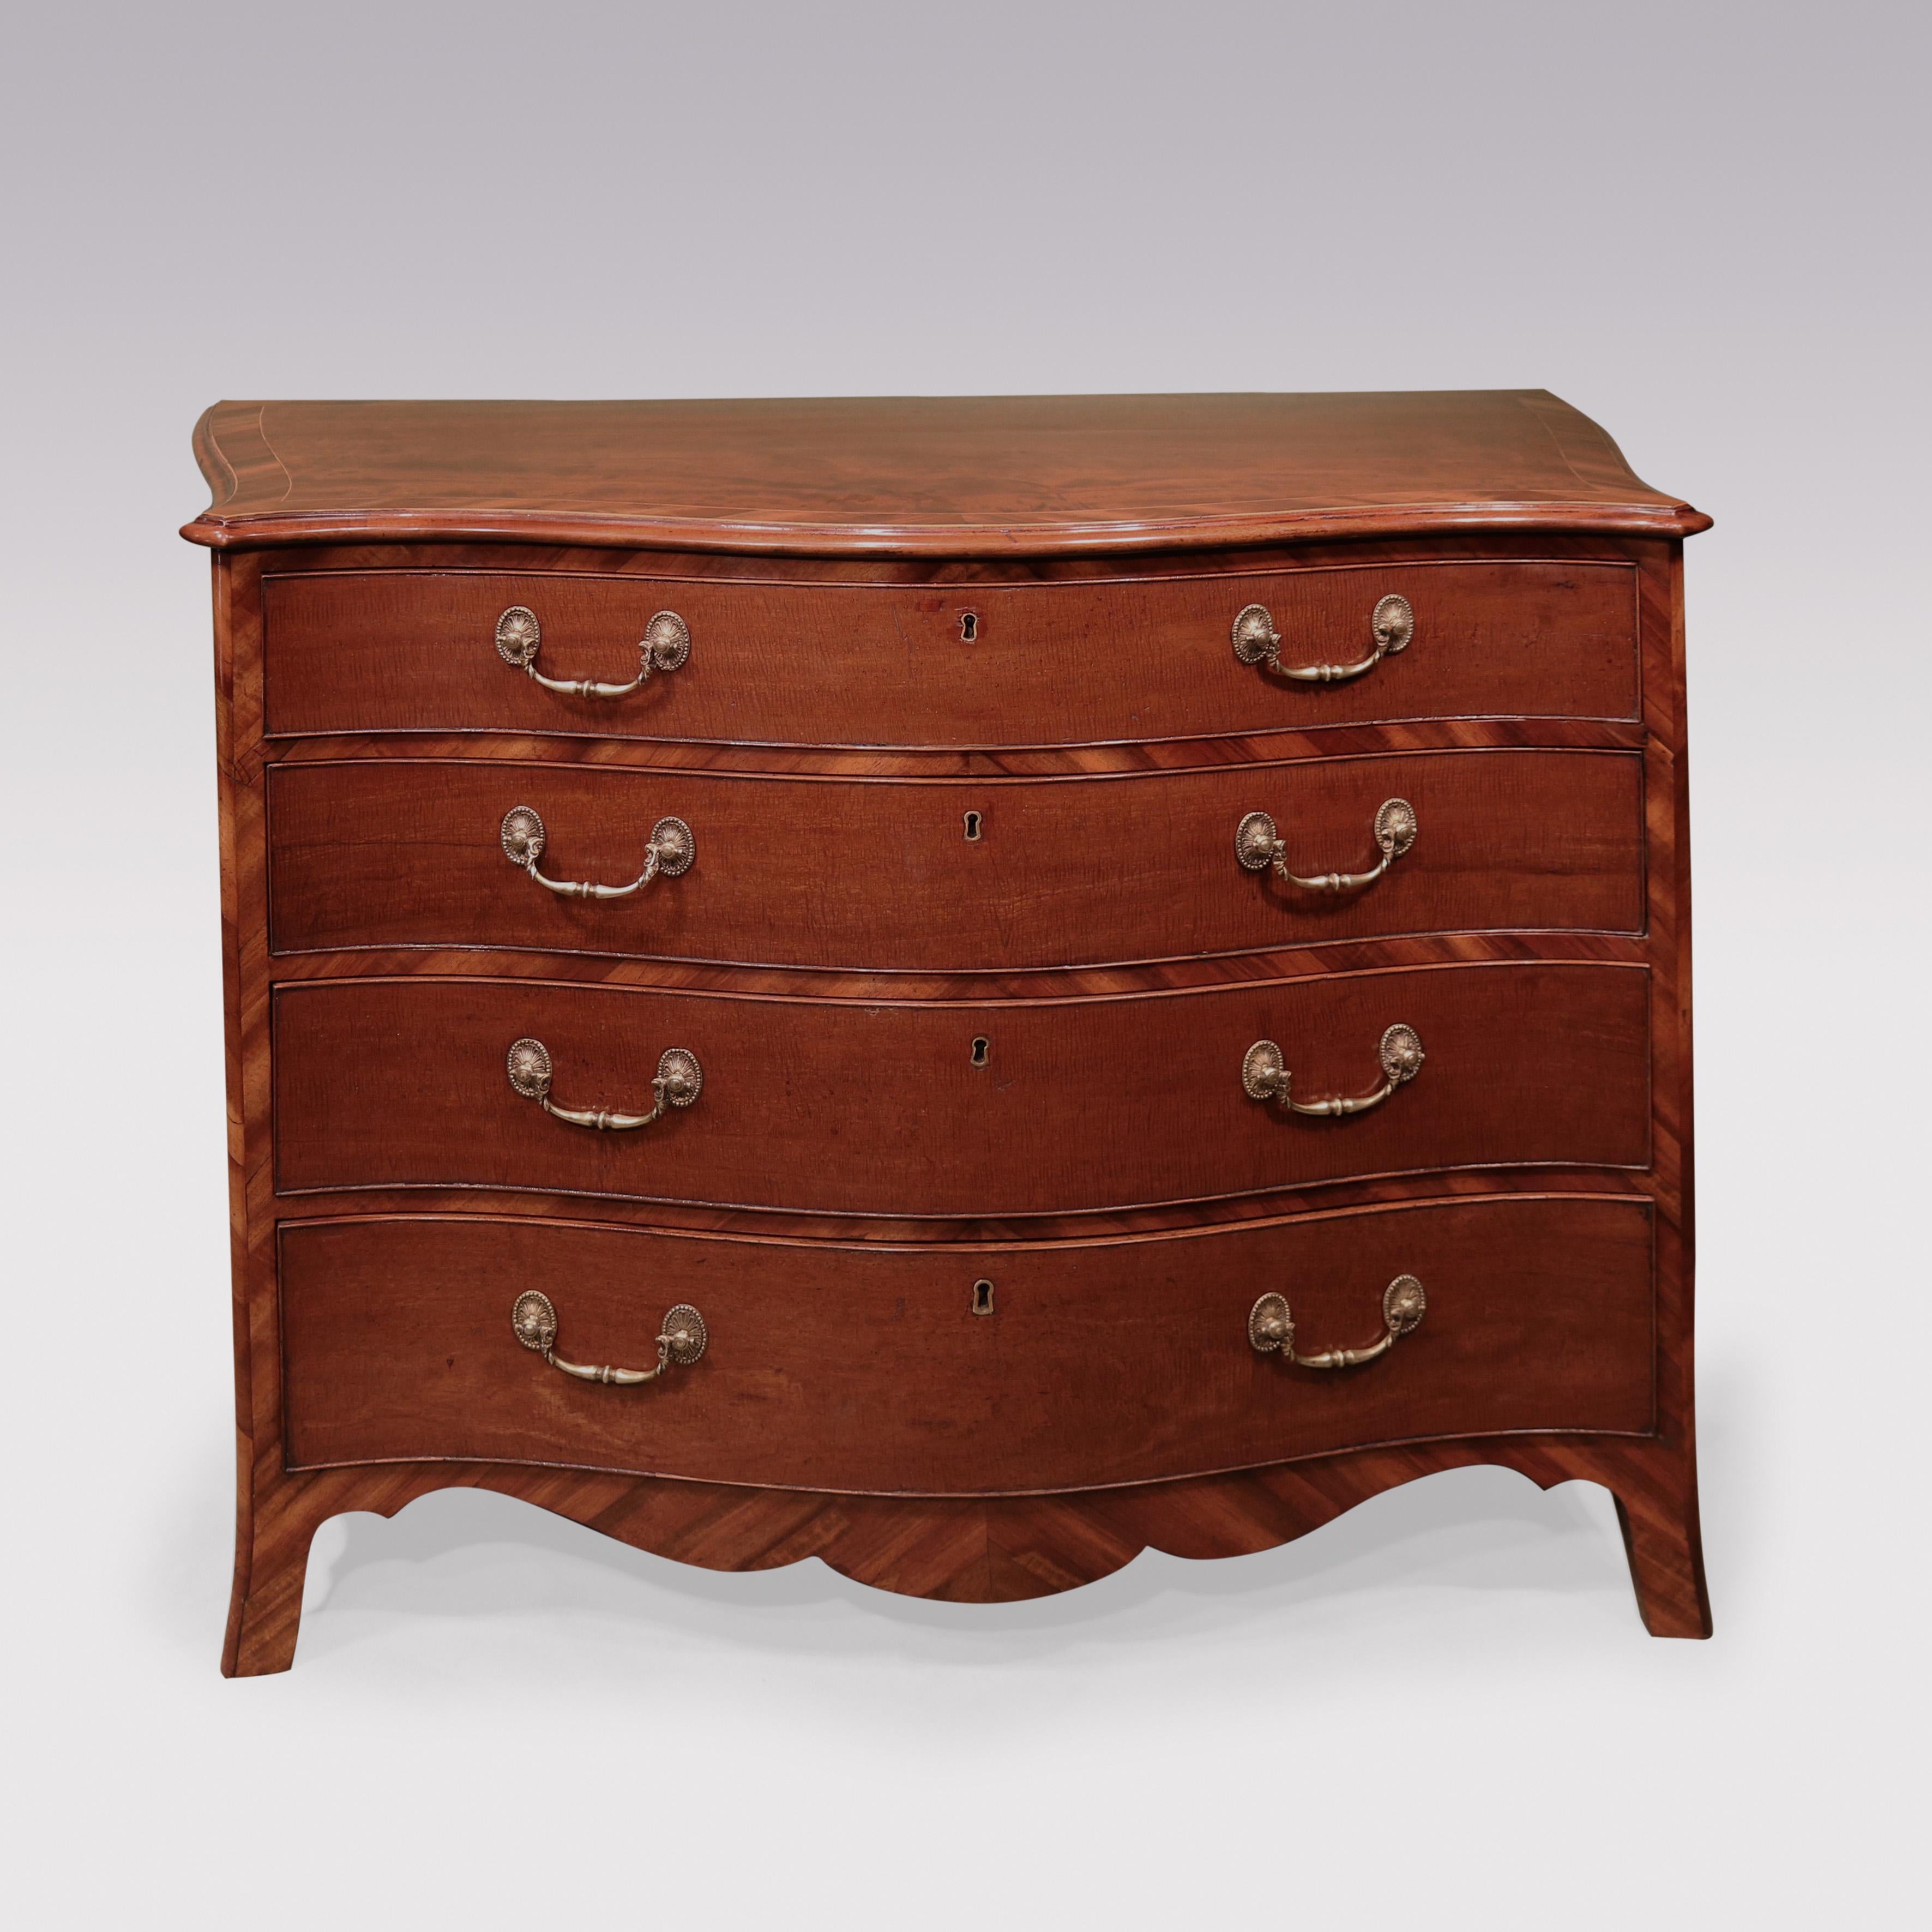 A fine mid-18th Century Geroge III period mahogany serpentine Chest, having moulded edge boxwood line inlaid & Gonzalez Alves crossbanded top, above 4 fiddleback mahogany drawers retaining original brass handles.  The Chest with Gonzalez Alves